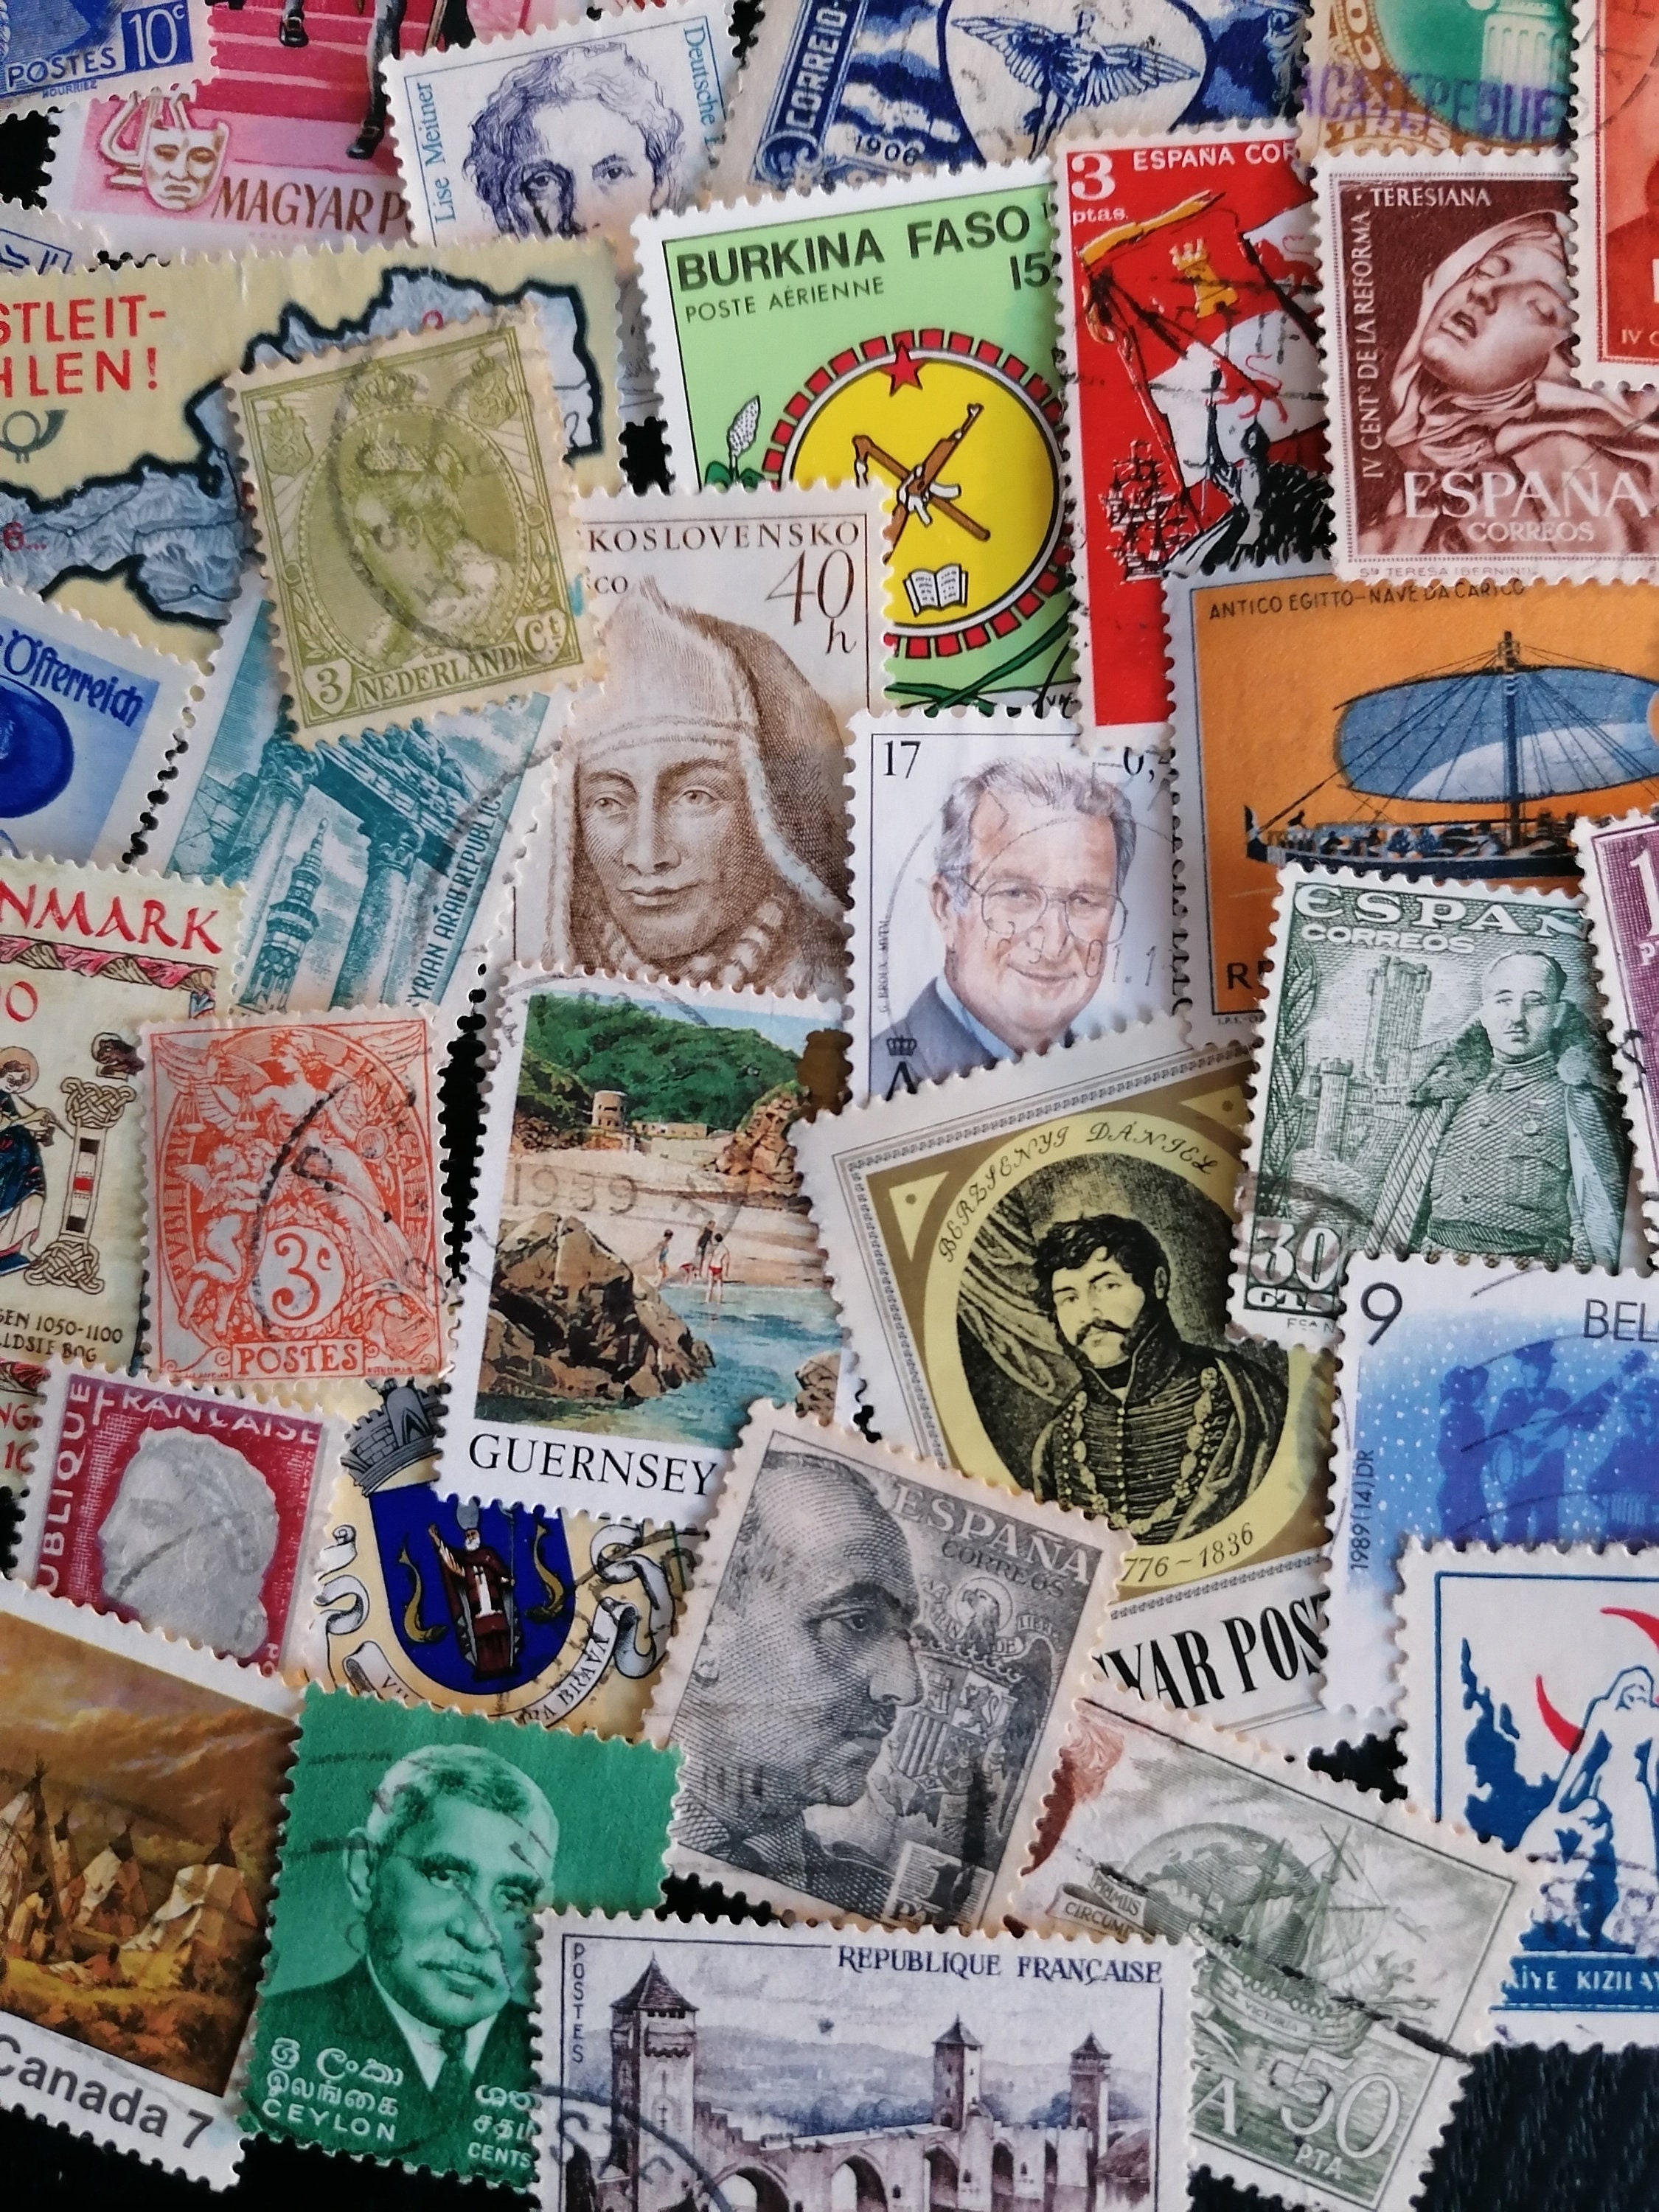  Postage Stamps - Free Shipping By